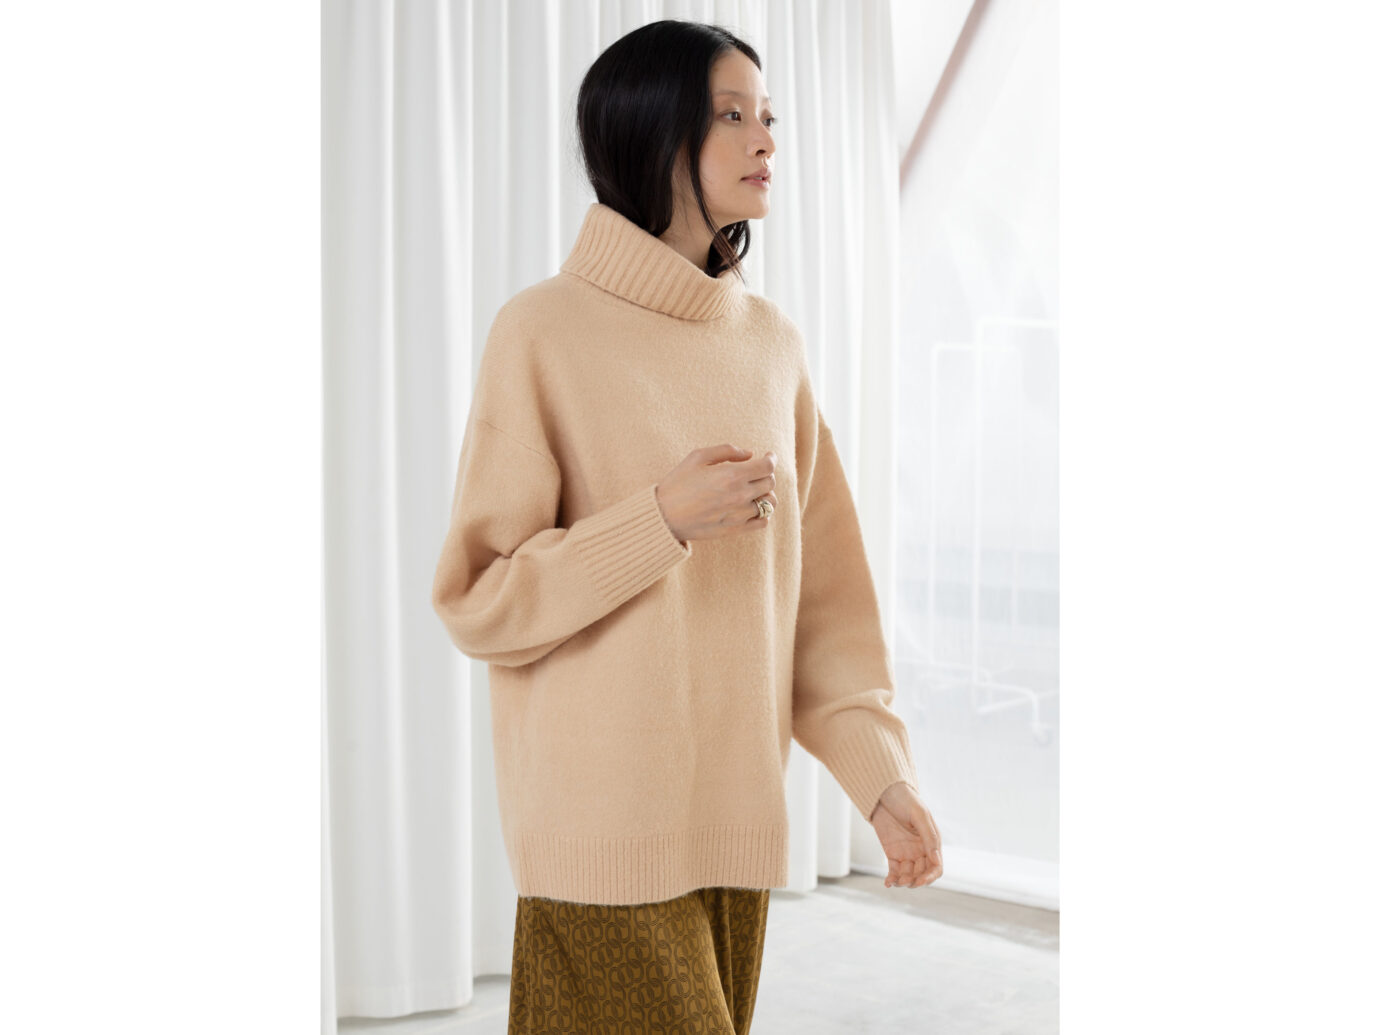 & Other Stories Slouchy Oversized Turtleneck Sweater